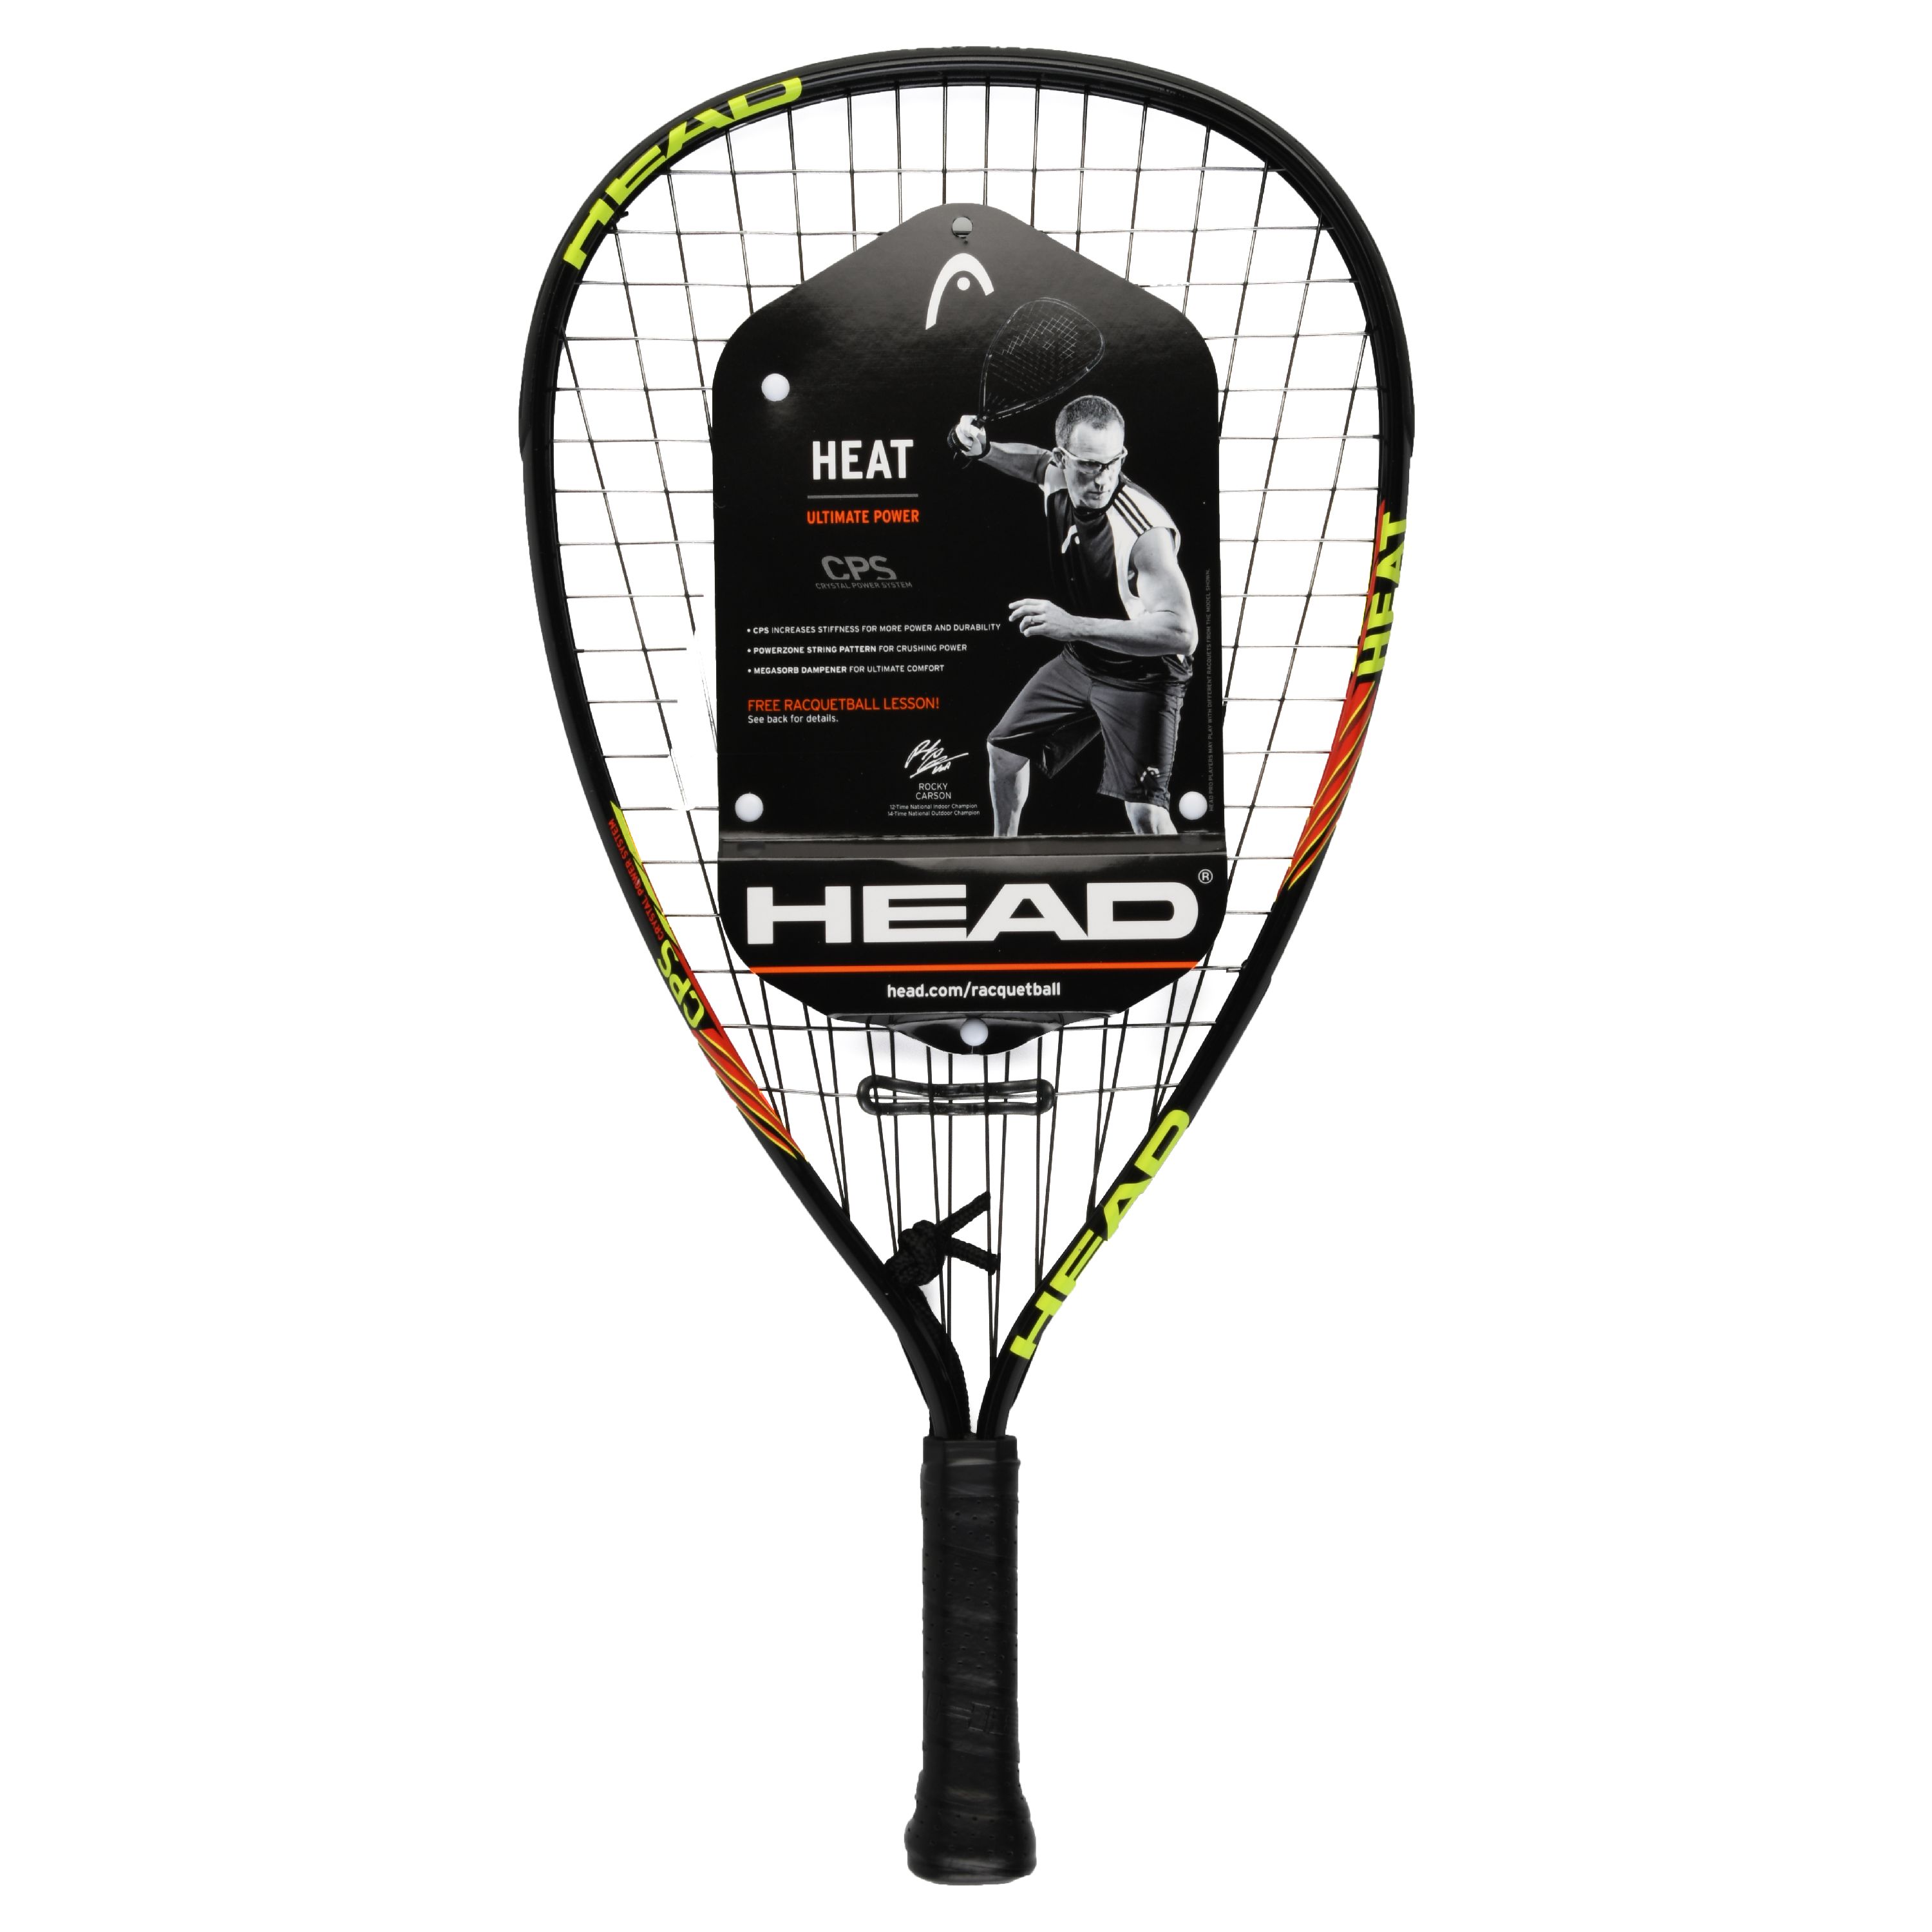 HEAD CPS Heat Racquetball Racquet, Pre-Strung, 107 Sq. in. Head Size, 6.7 Ounces, Black/Yellow - image 1 of 2